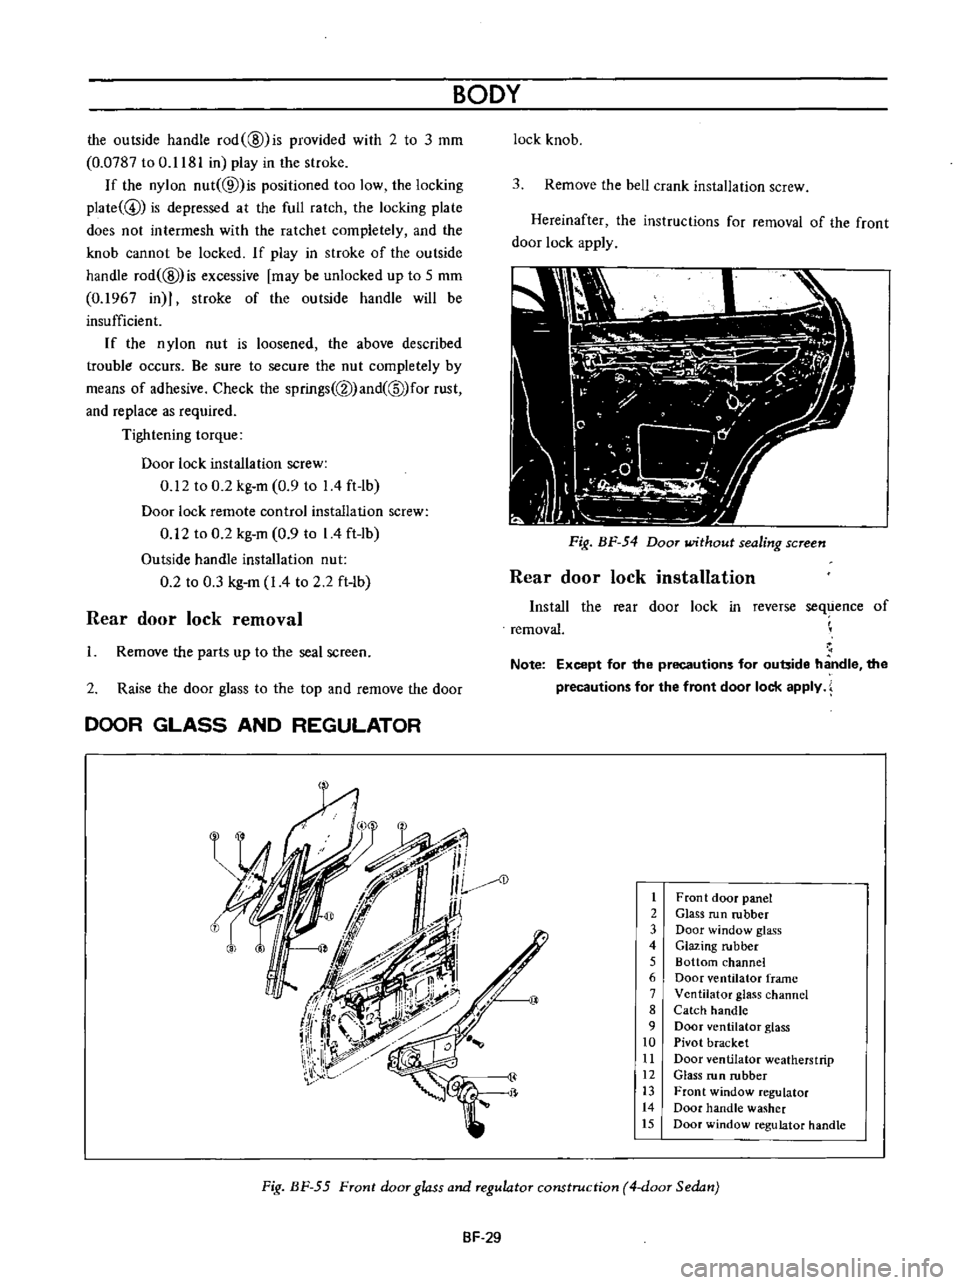 DATSUN B110 1973  Service Repair Manual 
the 
outside 
handle 
rod

@ 
is

provided 
with 
2

to 
3 
mm

0

0787 
to 
0

1181 
in

play 
in 
the

stroke

If 
the

nylon 
nut

@ 
is

positioned 
too

low 
the

locking

plate 
@ 
is

depresse